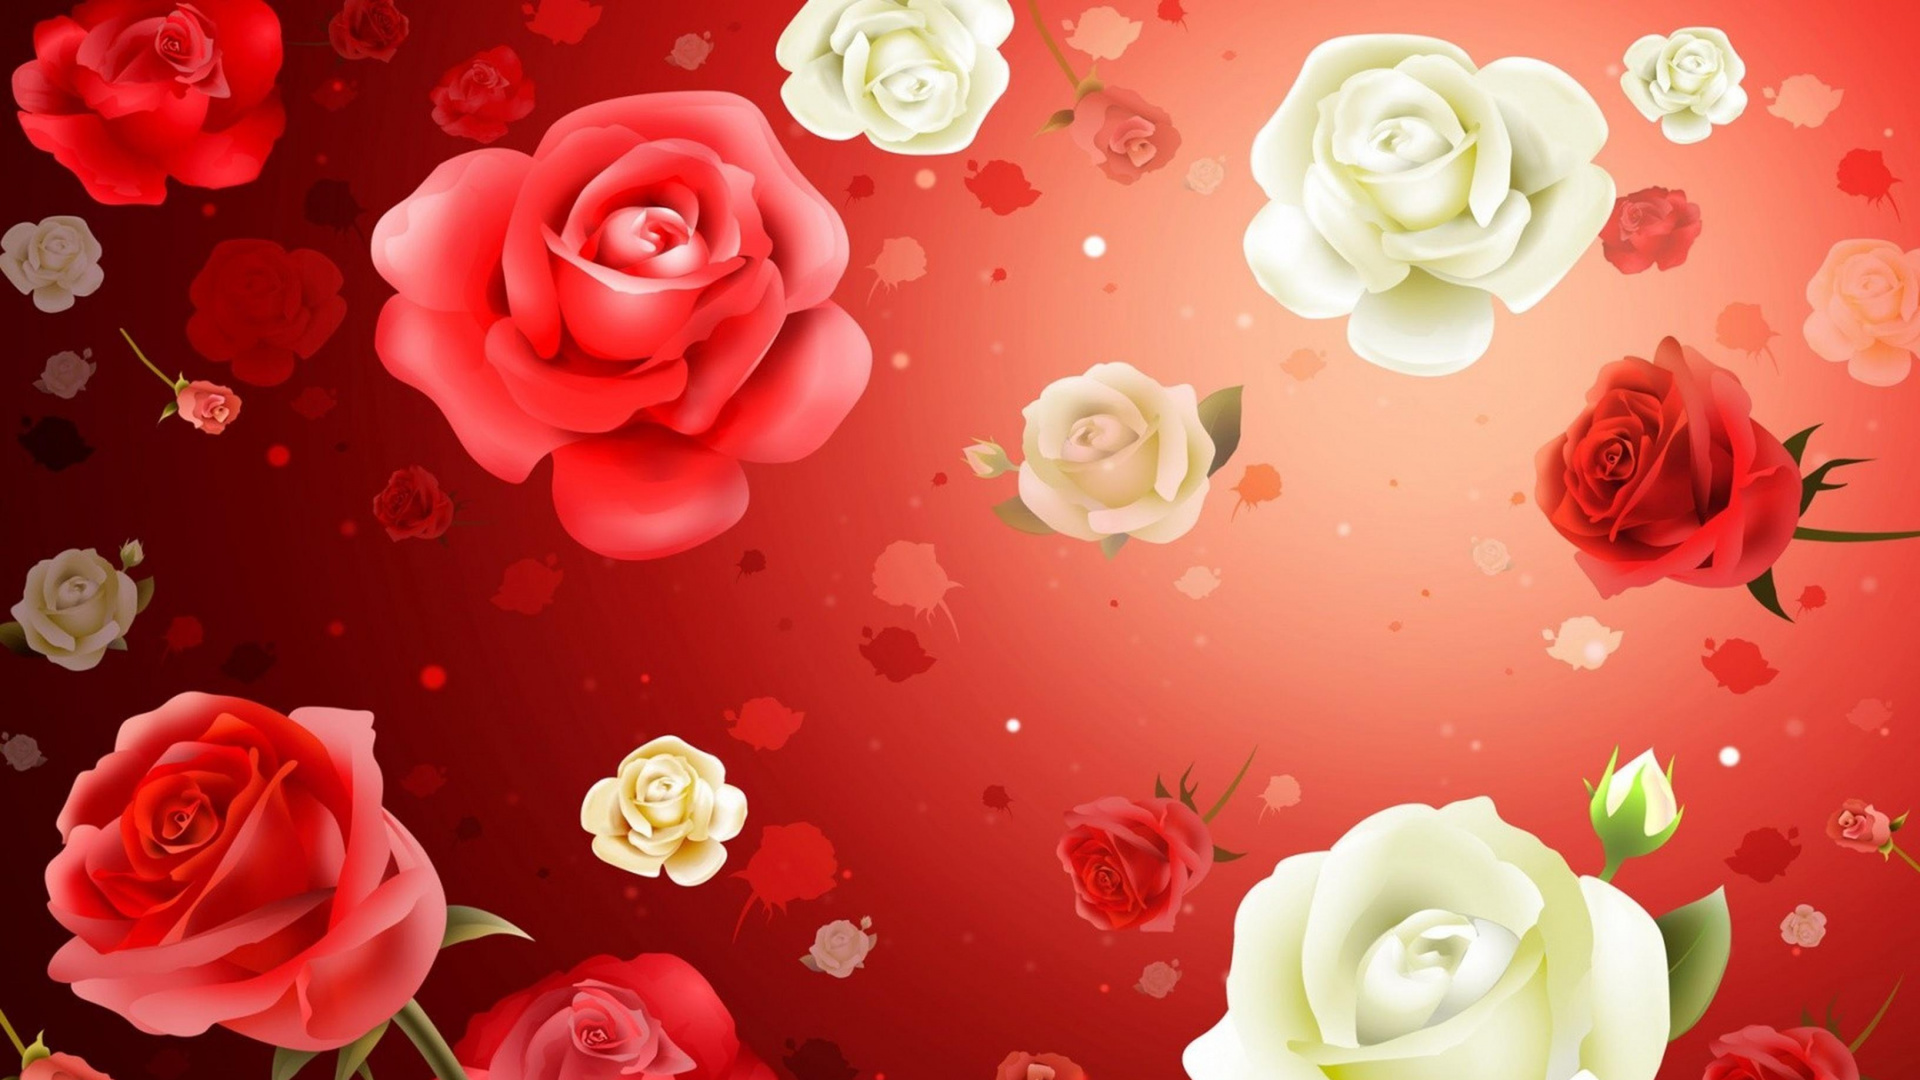 White and Pink Roses on Red Surface. Wallpaper in 1920x1080 Resolution